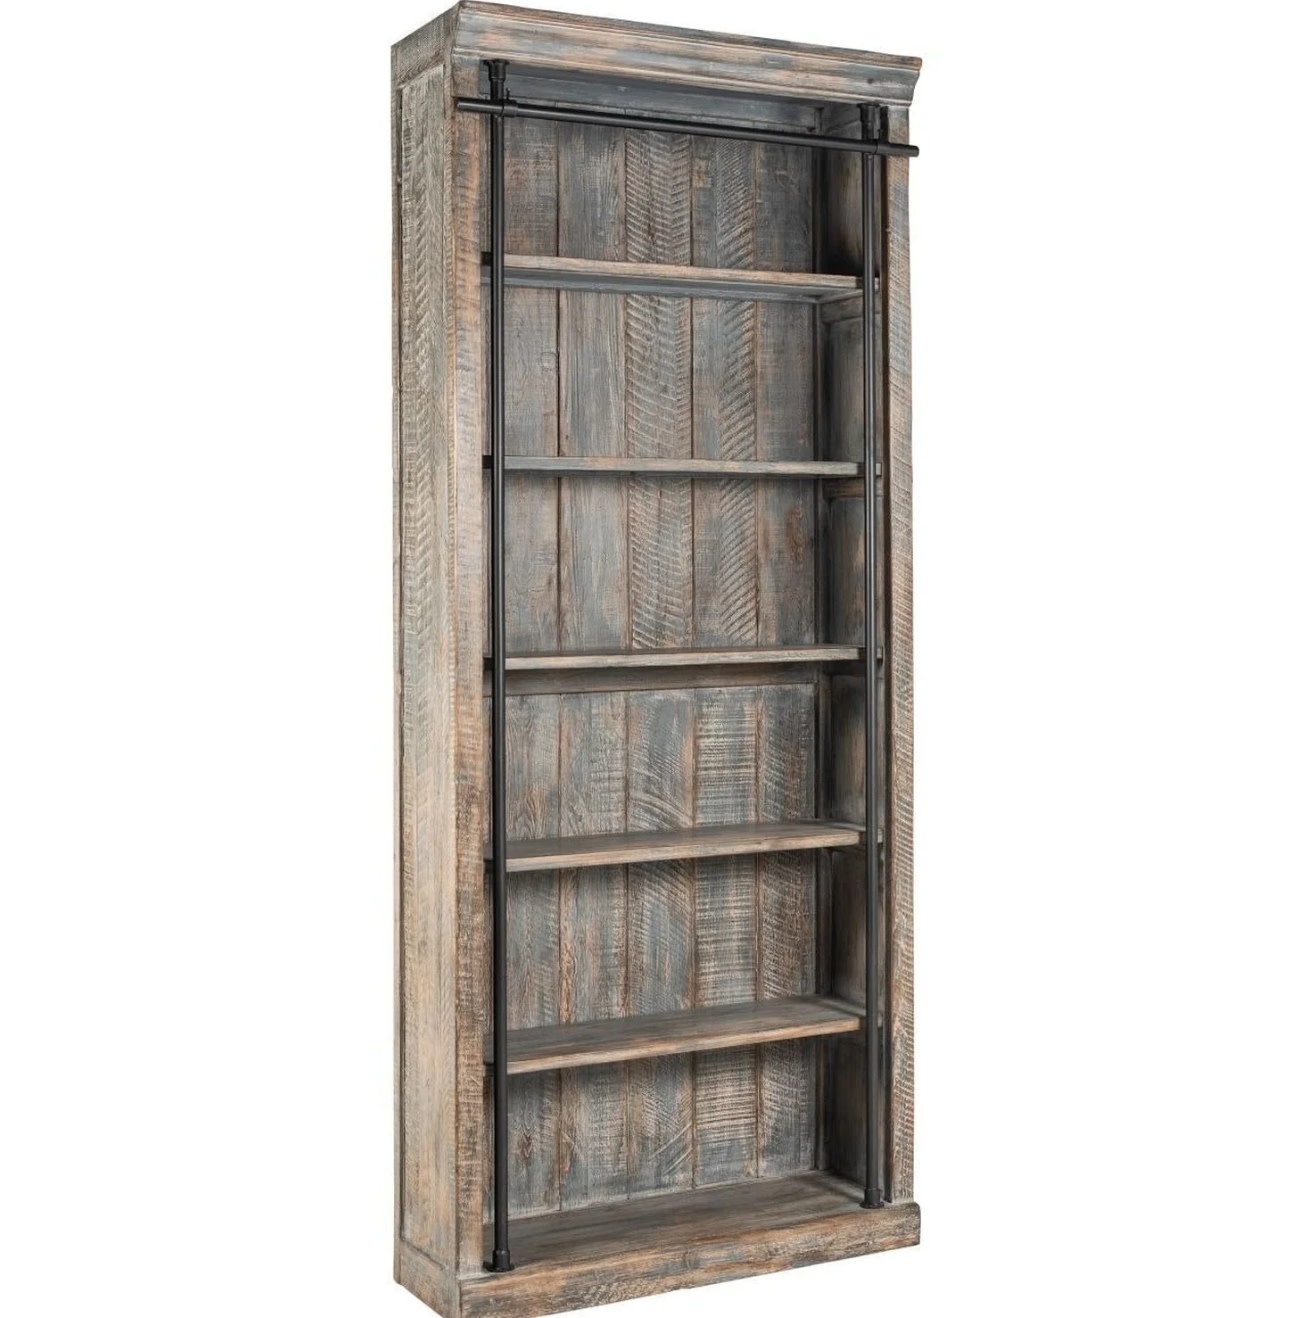 Naomi Bookcase Antique Blue / Iron, 40" x 15" x 94"Available for local pick up